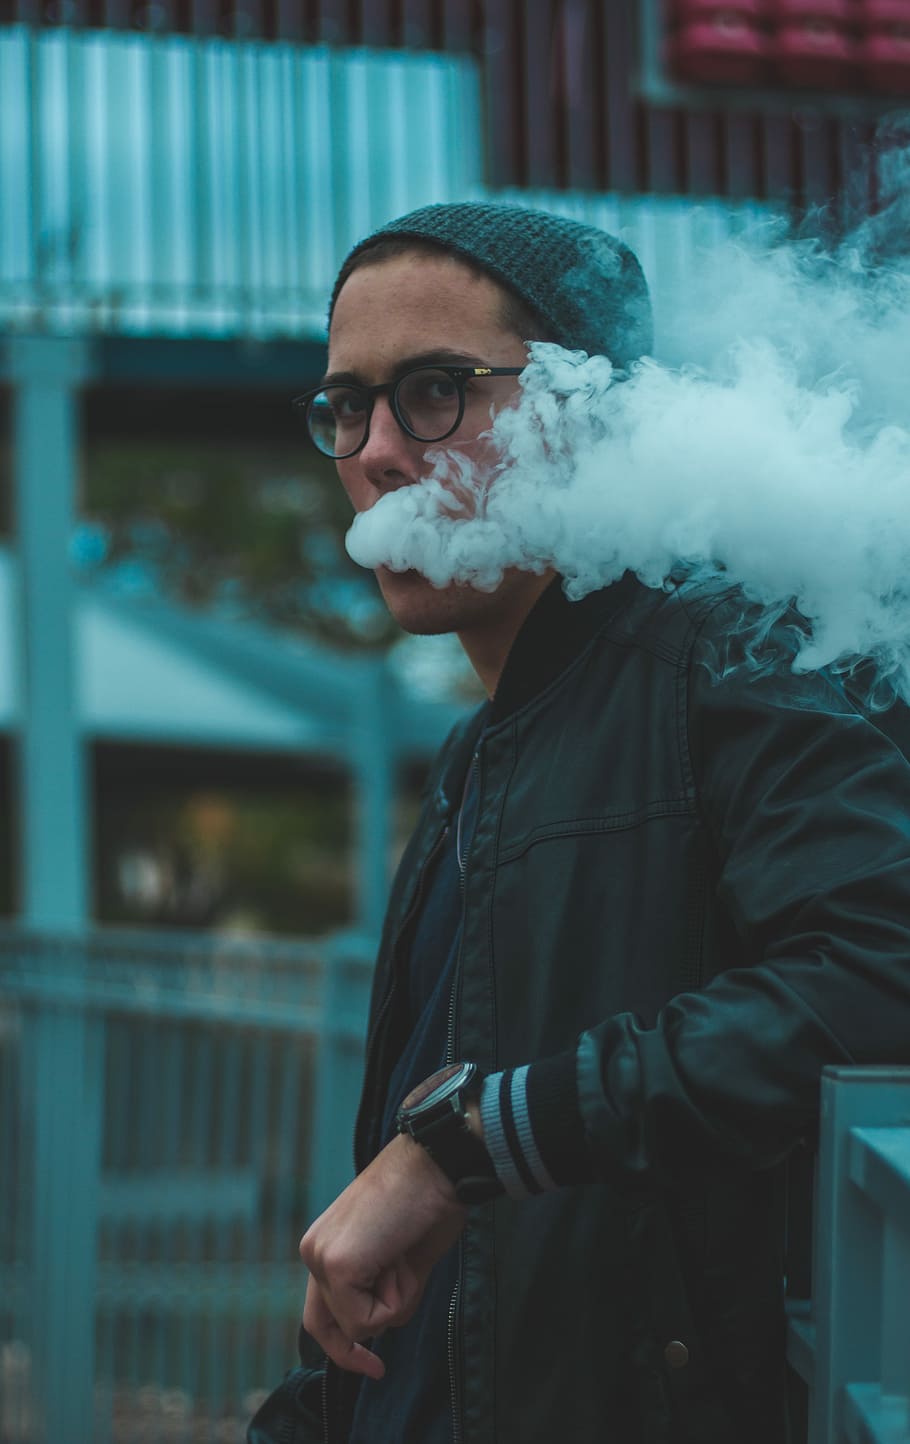 HD wallpaper: man vaping smoke, man leaning while smoke coming out in his  mouth | Wallpaper Flare